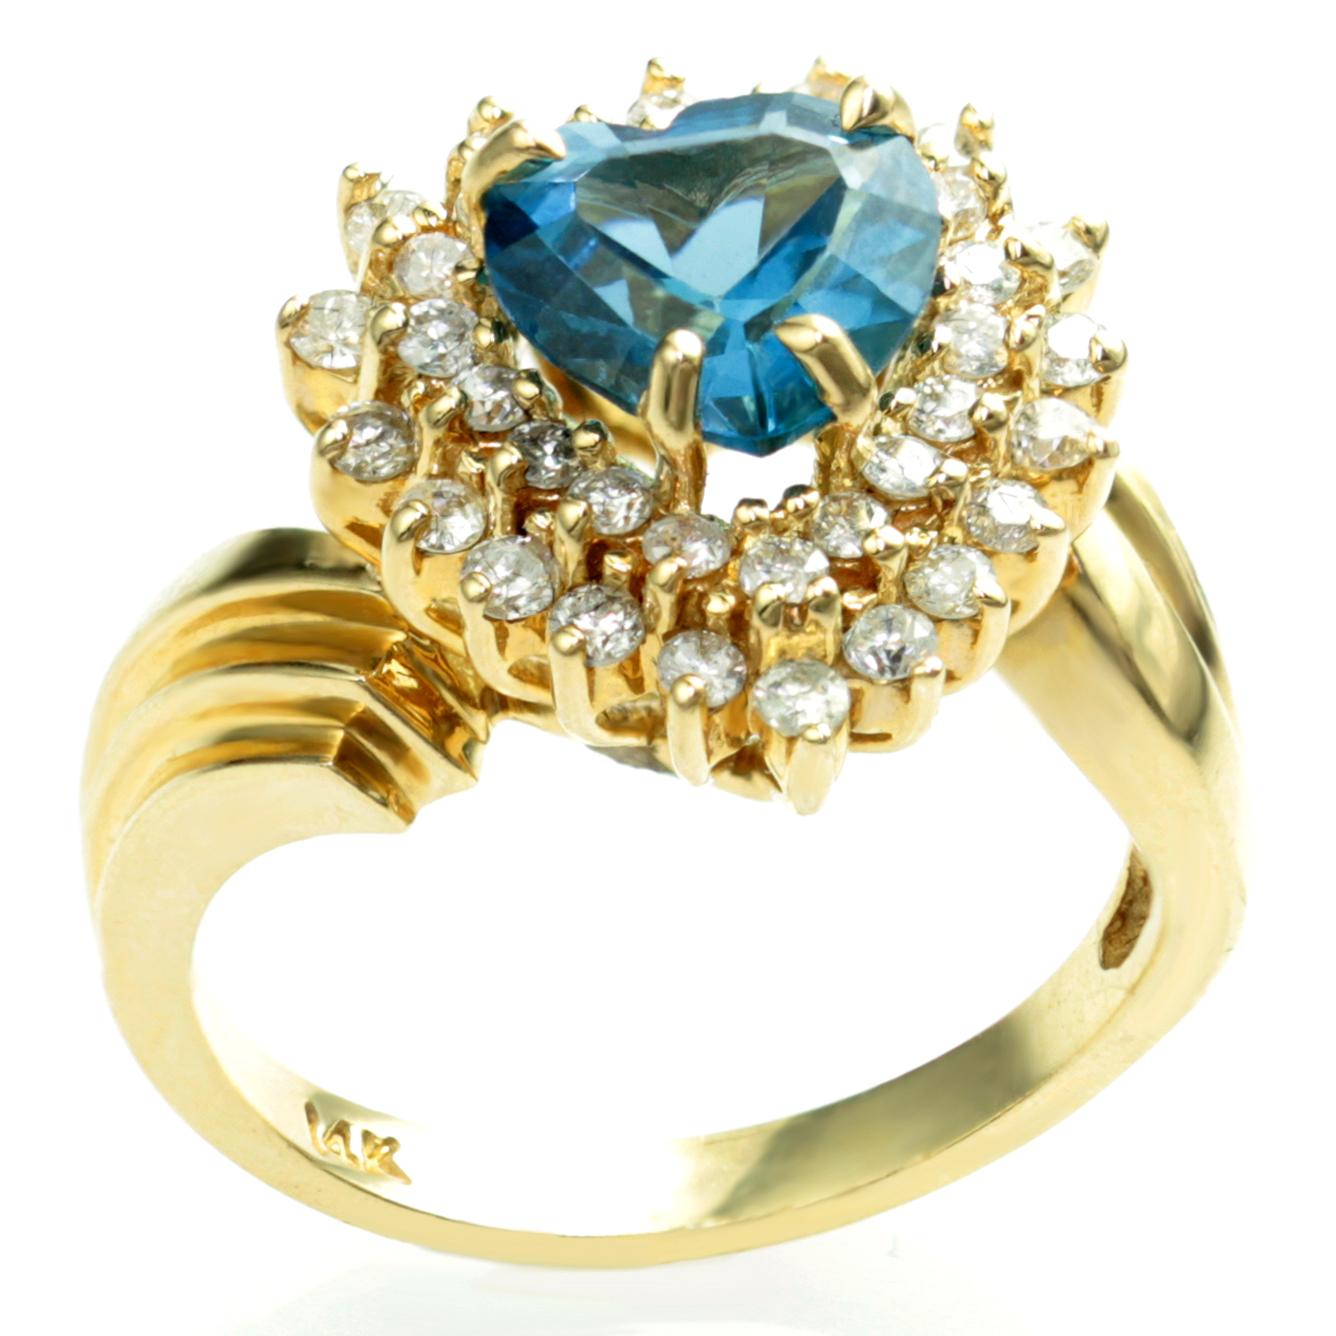 This fabulous circa 1980s ring is made in 14k yellow gold and prong-set with a faceted 8.0mm x 8.0mm London Blue heat-treated topaz heart surrounded by two rows of sparkling round diamonds. A romantic and elegant design. Measurements: 0.59